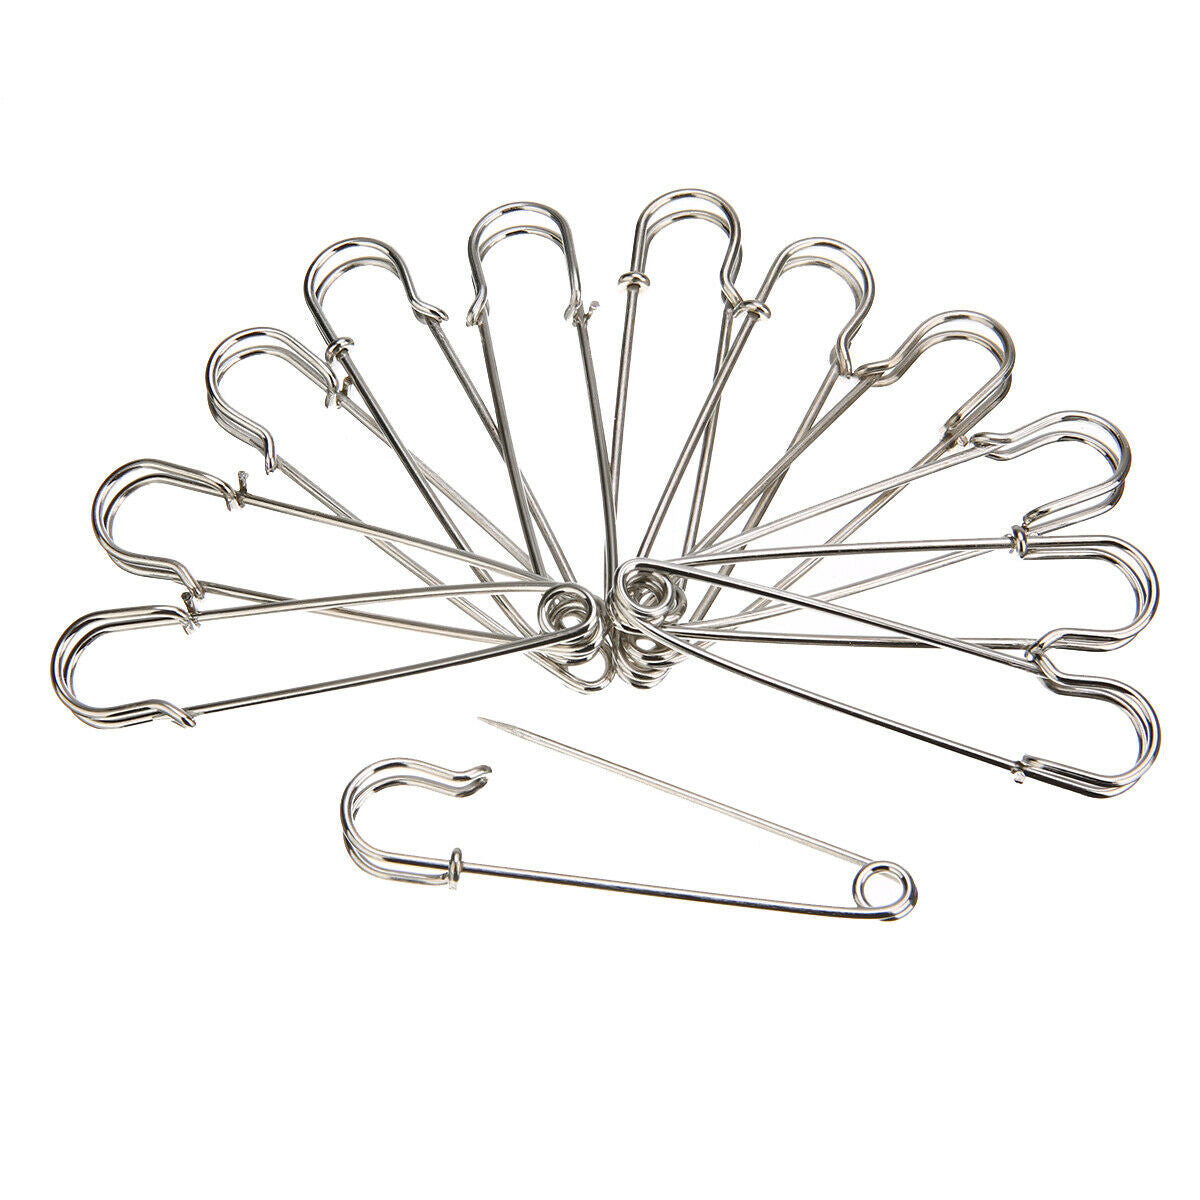 12Pcs Large Heavy Duty Stainless Steel Big Jumbo Safety Pin Blanket Crafting DIY